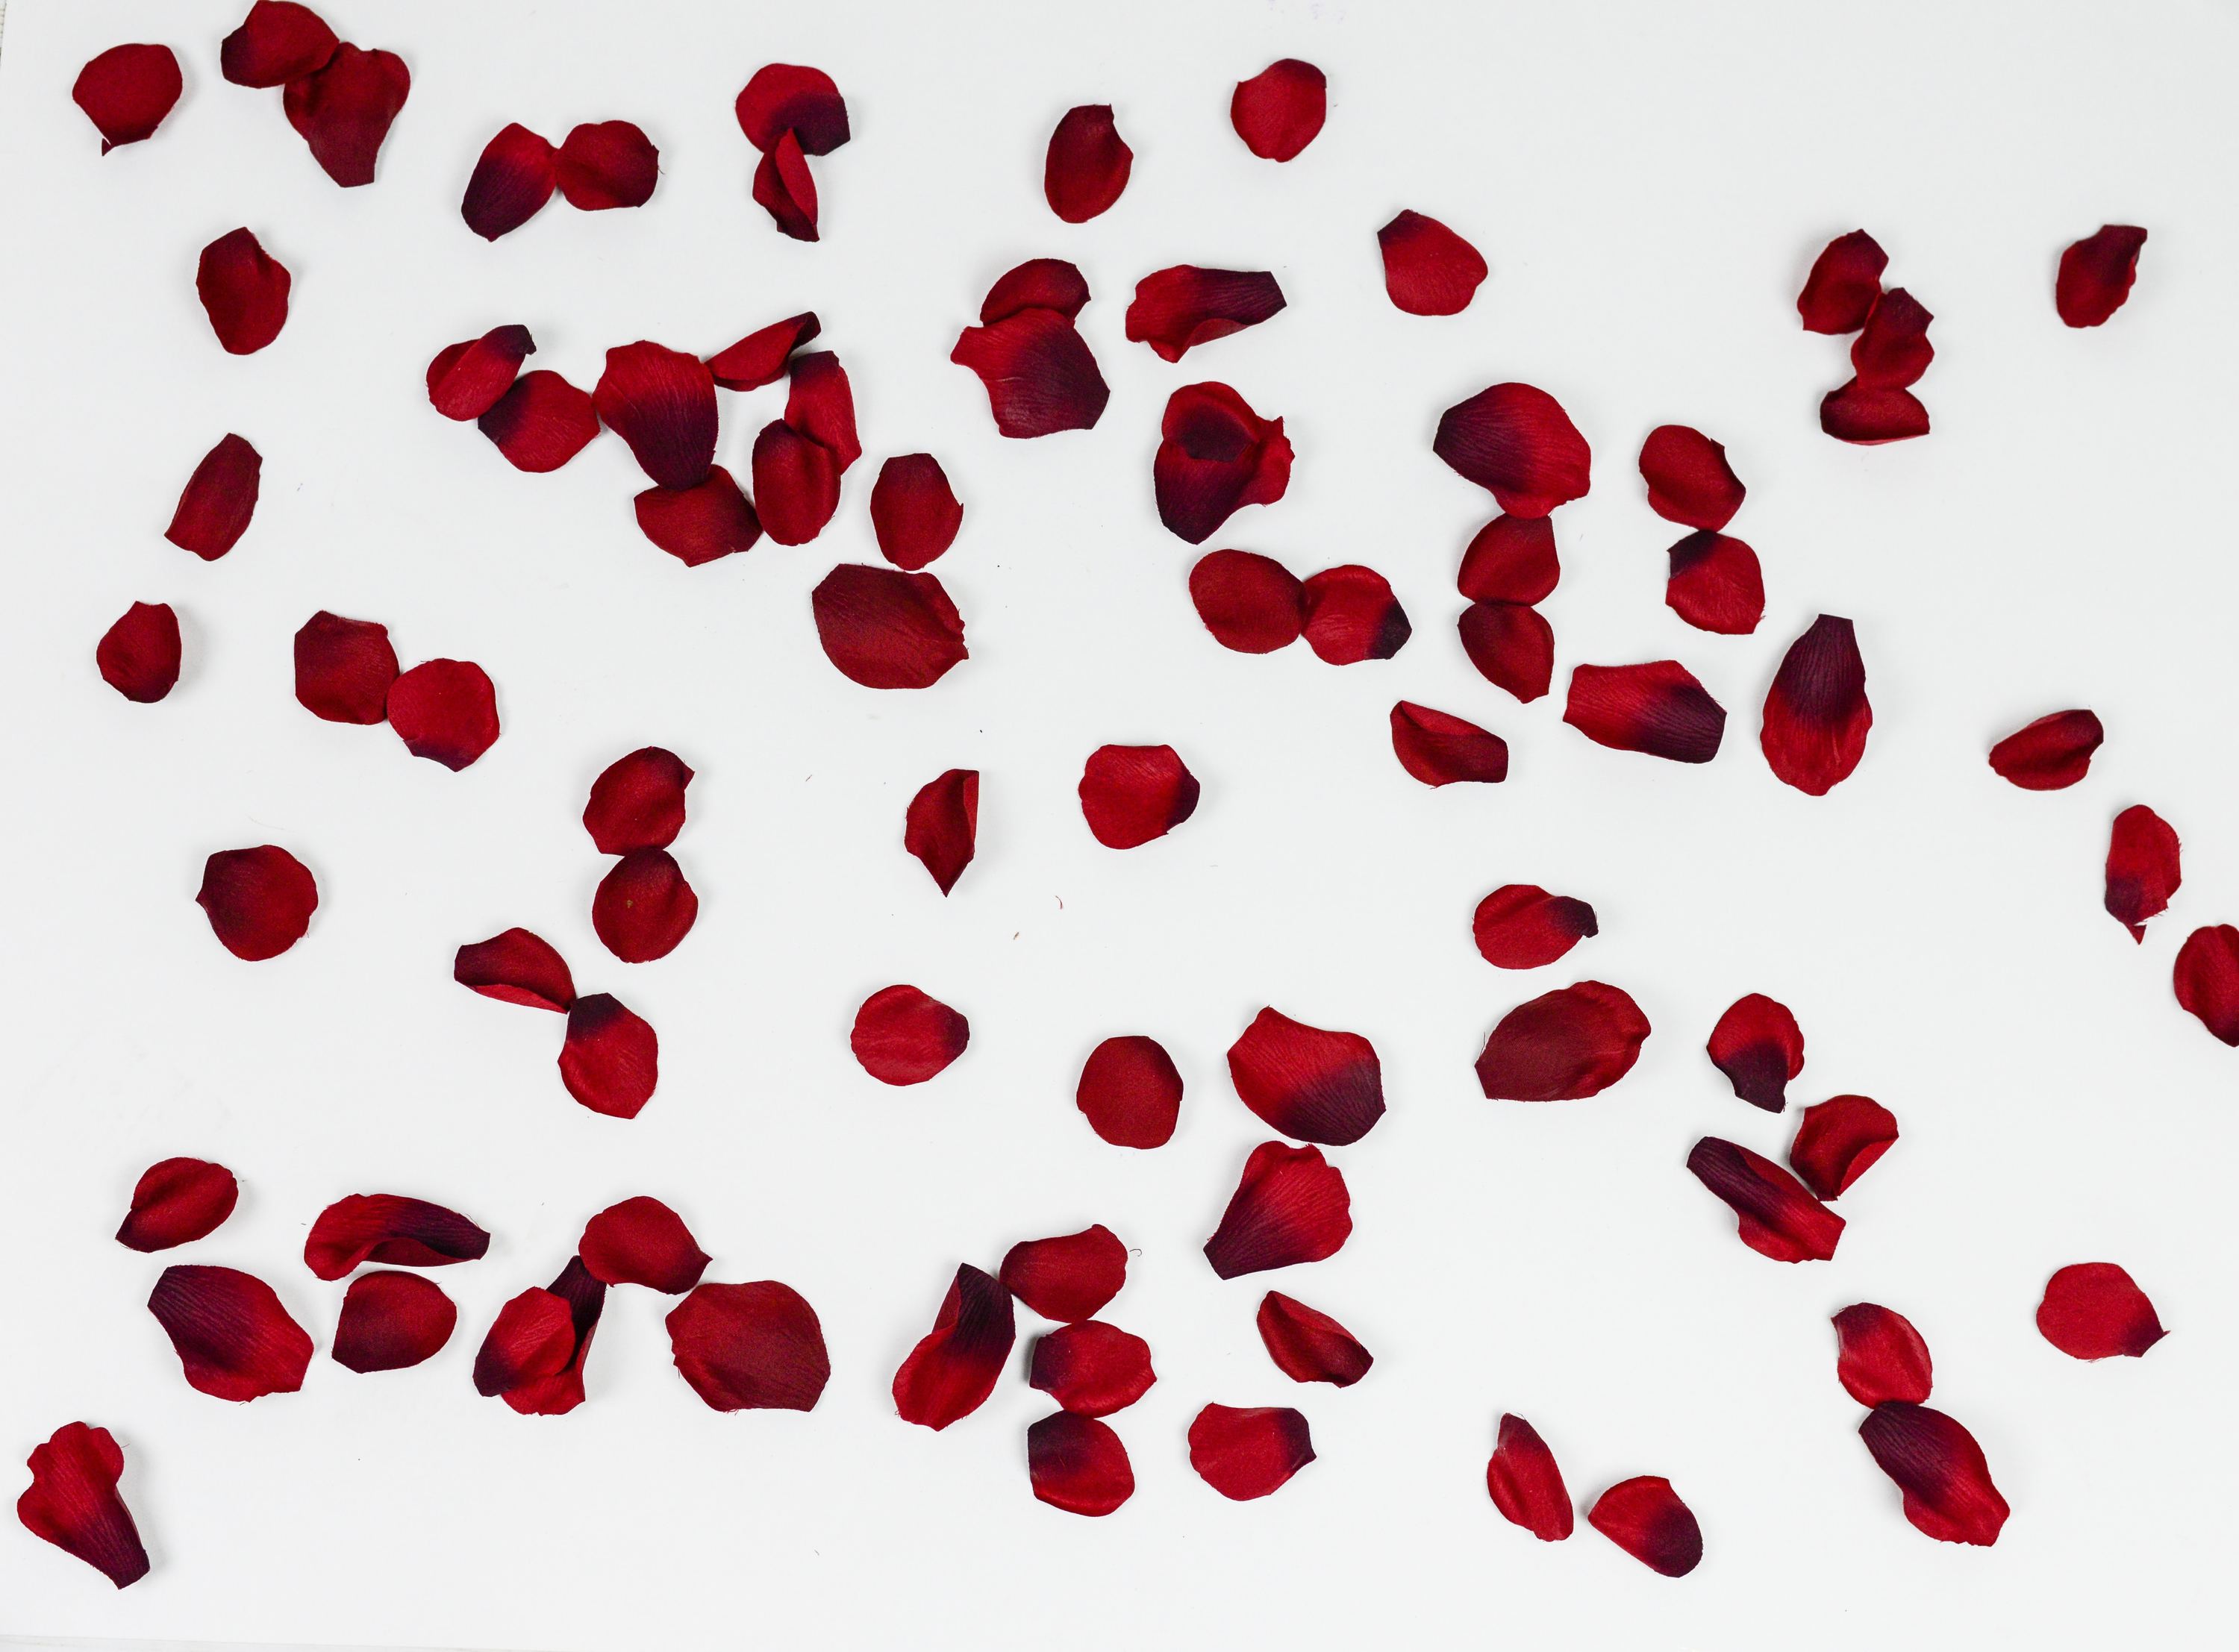 LUXE, Falling Rose Petals Photo Overlays